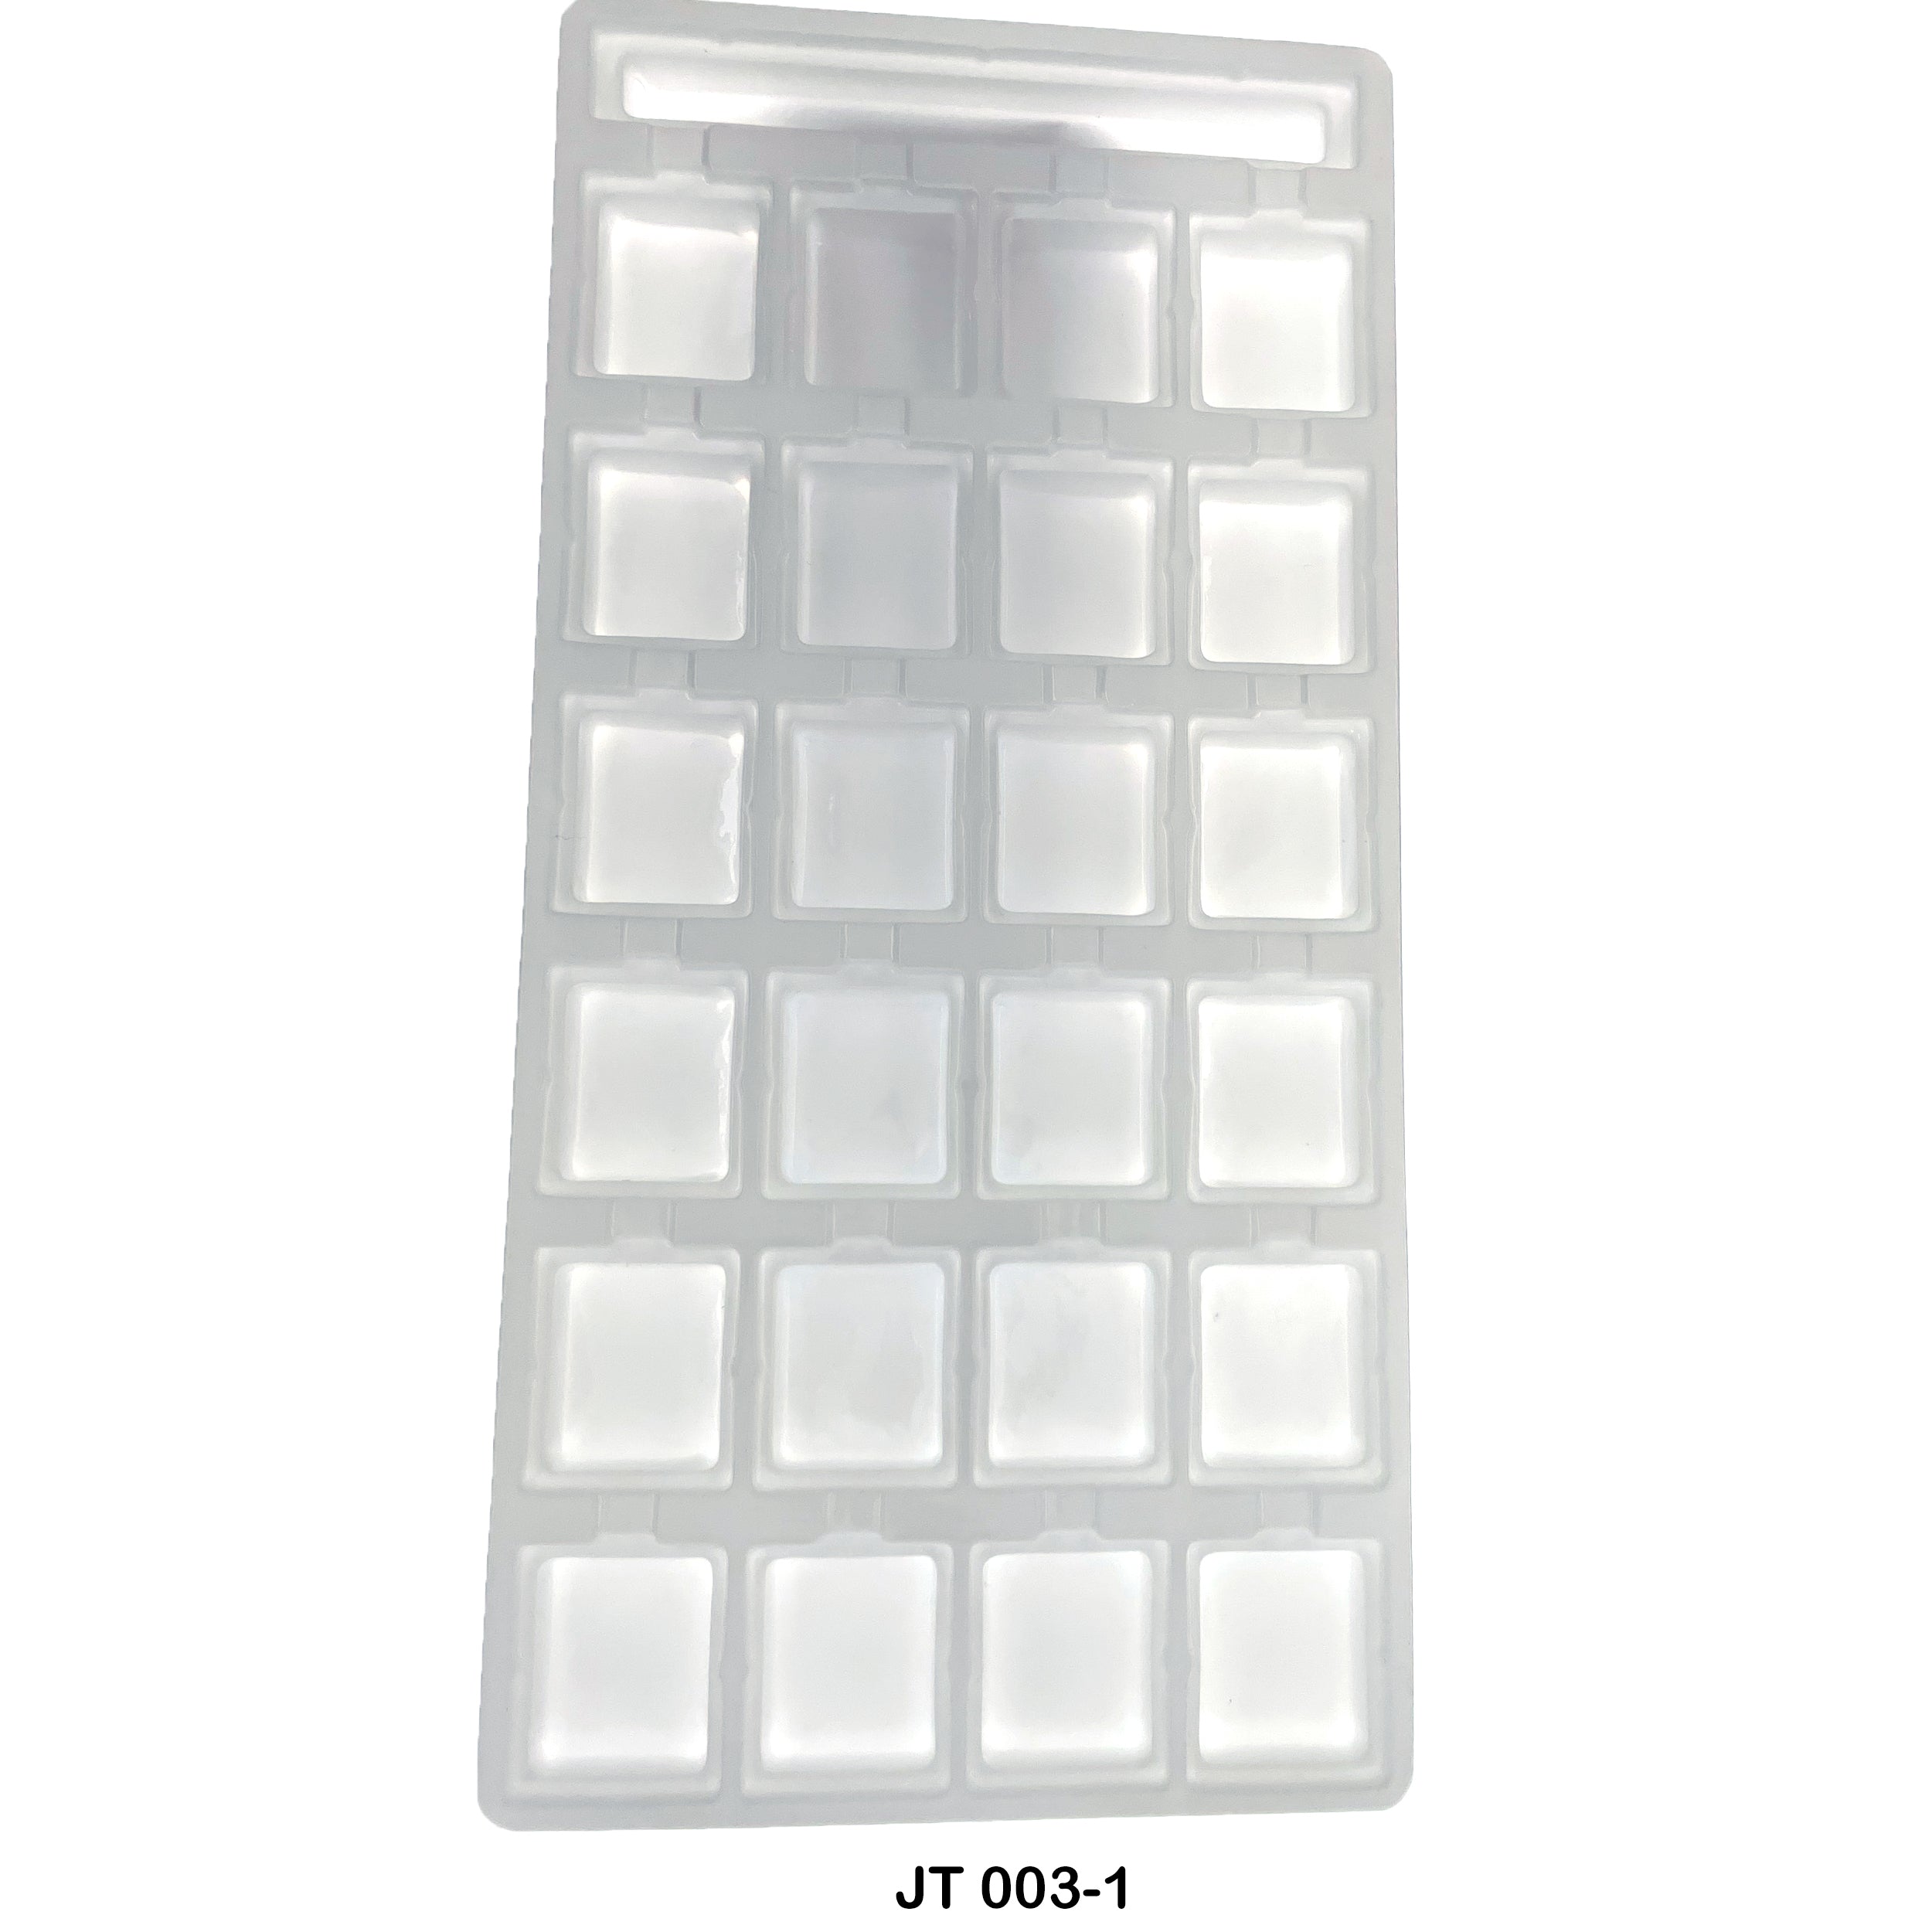 24 Rectangle Cards Tray JT 003-1